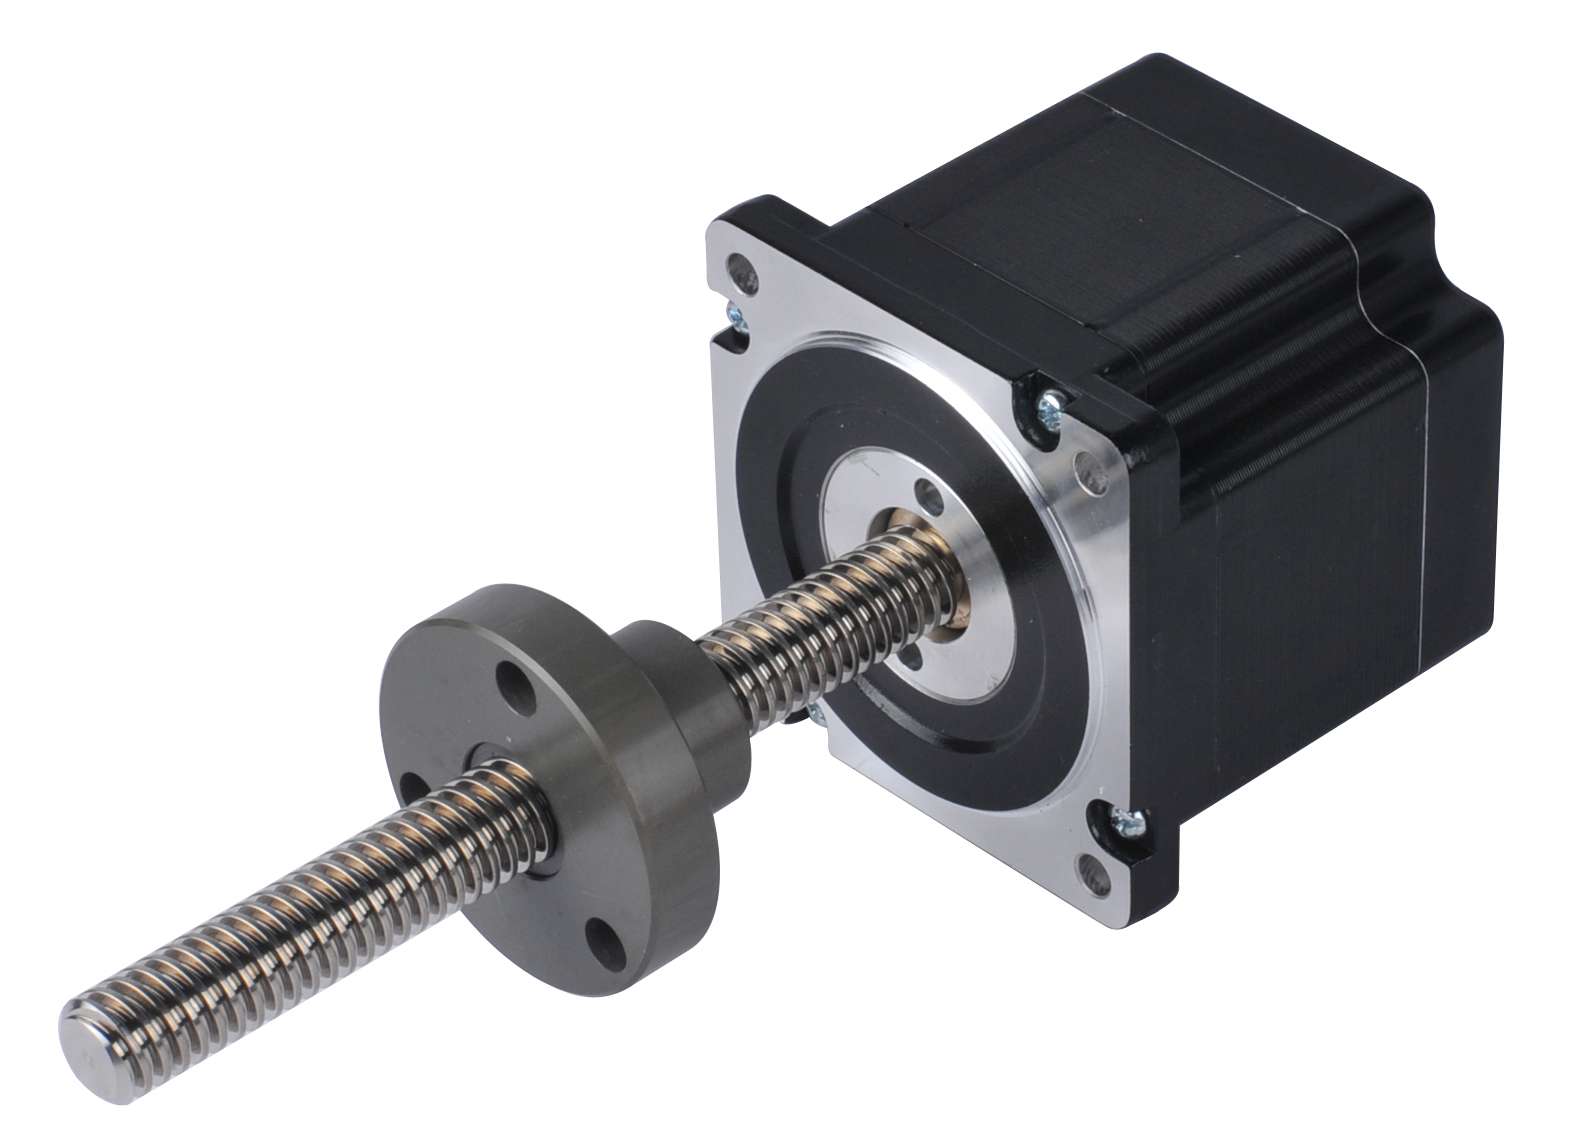 Details about   Hybrid Stepper Motor Linear Actuator w/ Rotary Encoder 9mm Motorized Micrometer 